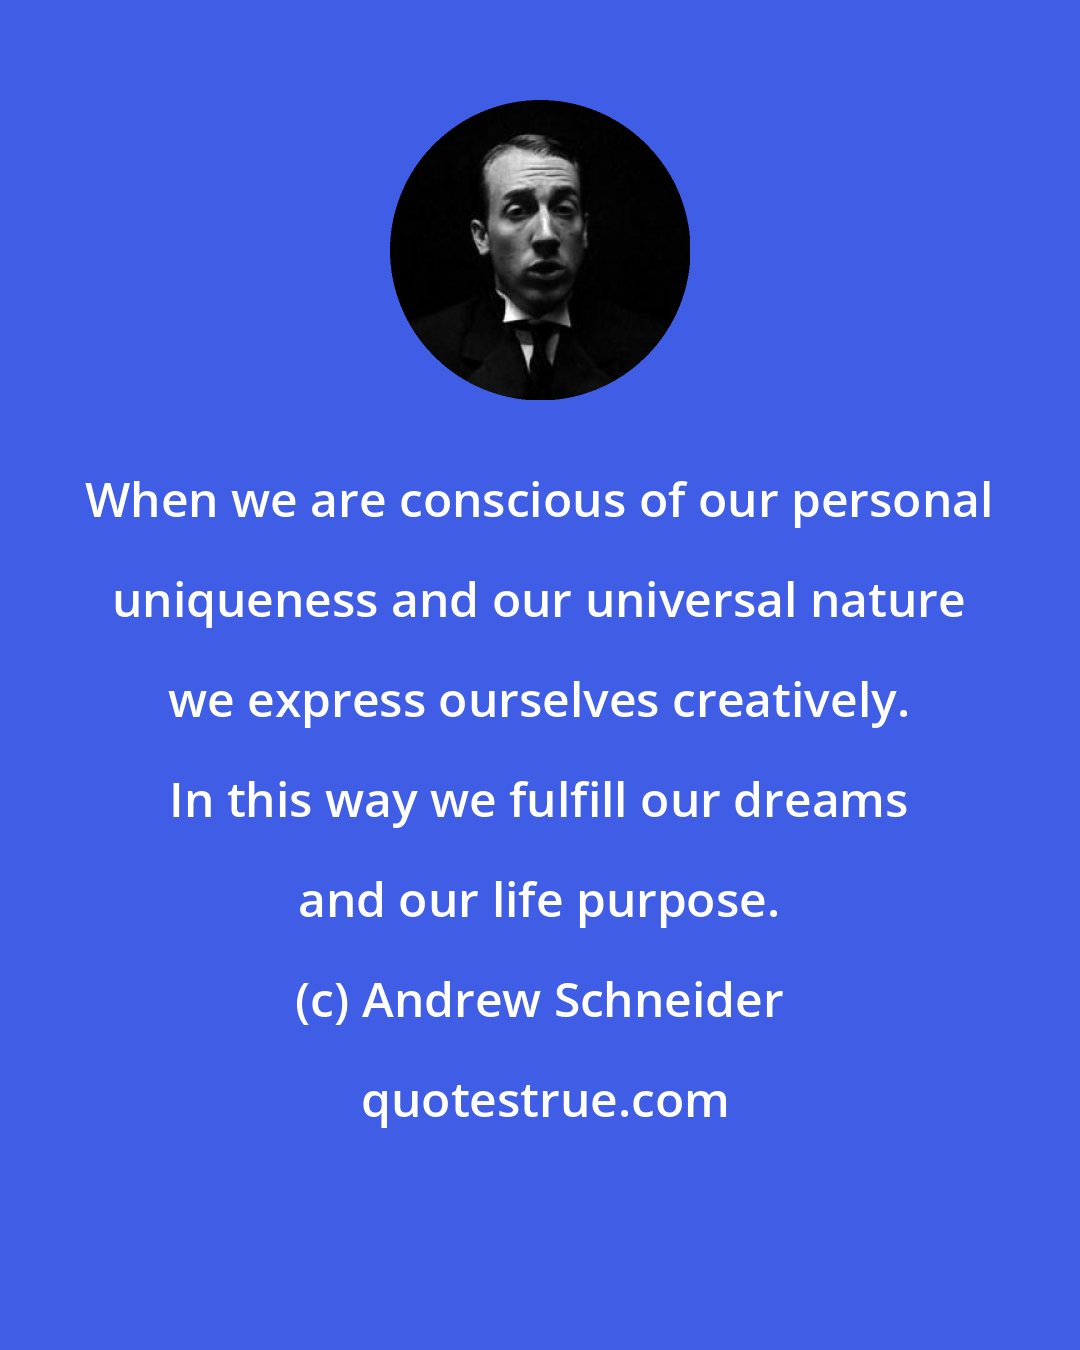 Andrew Schneider: When we are conscious of our personal uniqueness and our universal nature we express ourselves creatively. In this way we fulfill our dreams and our life purpose.